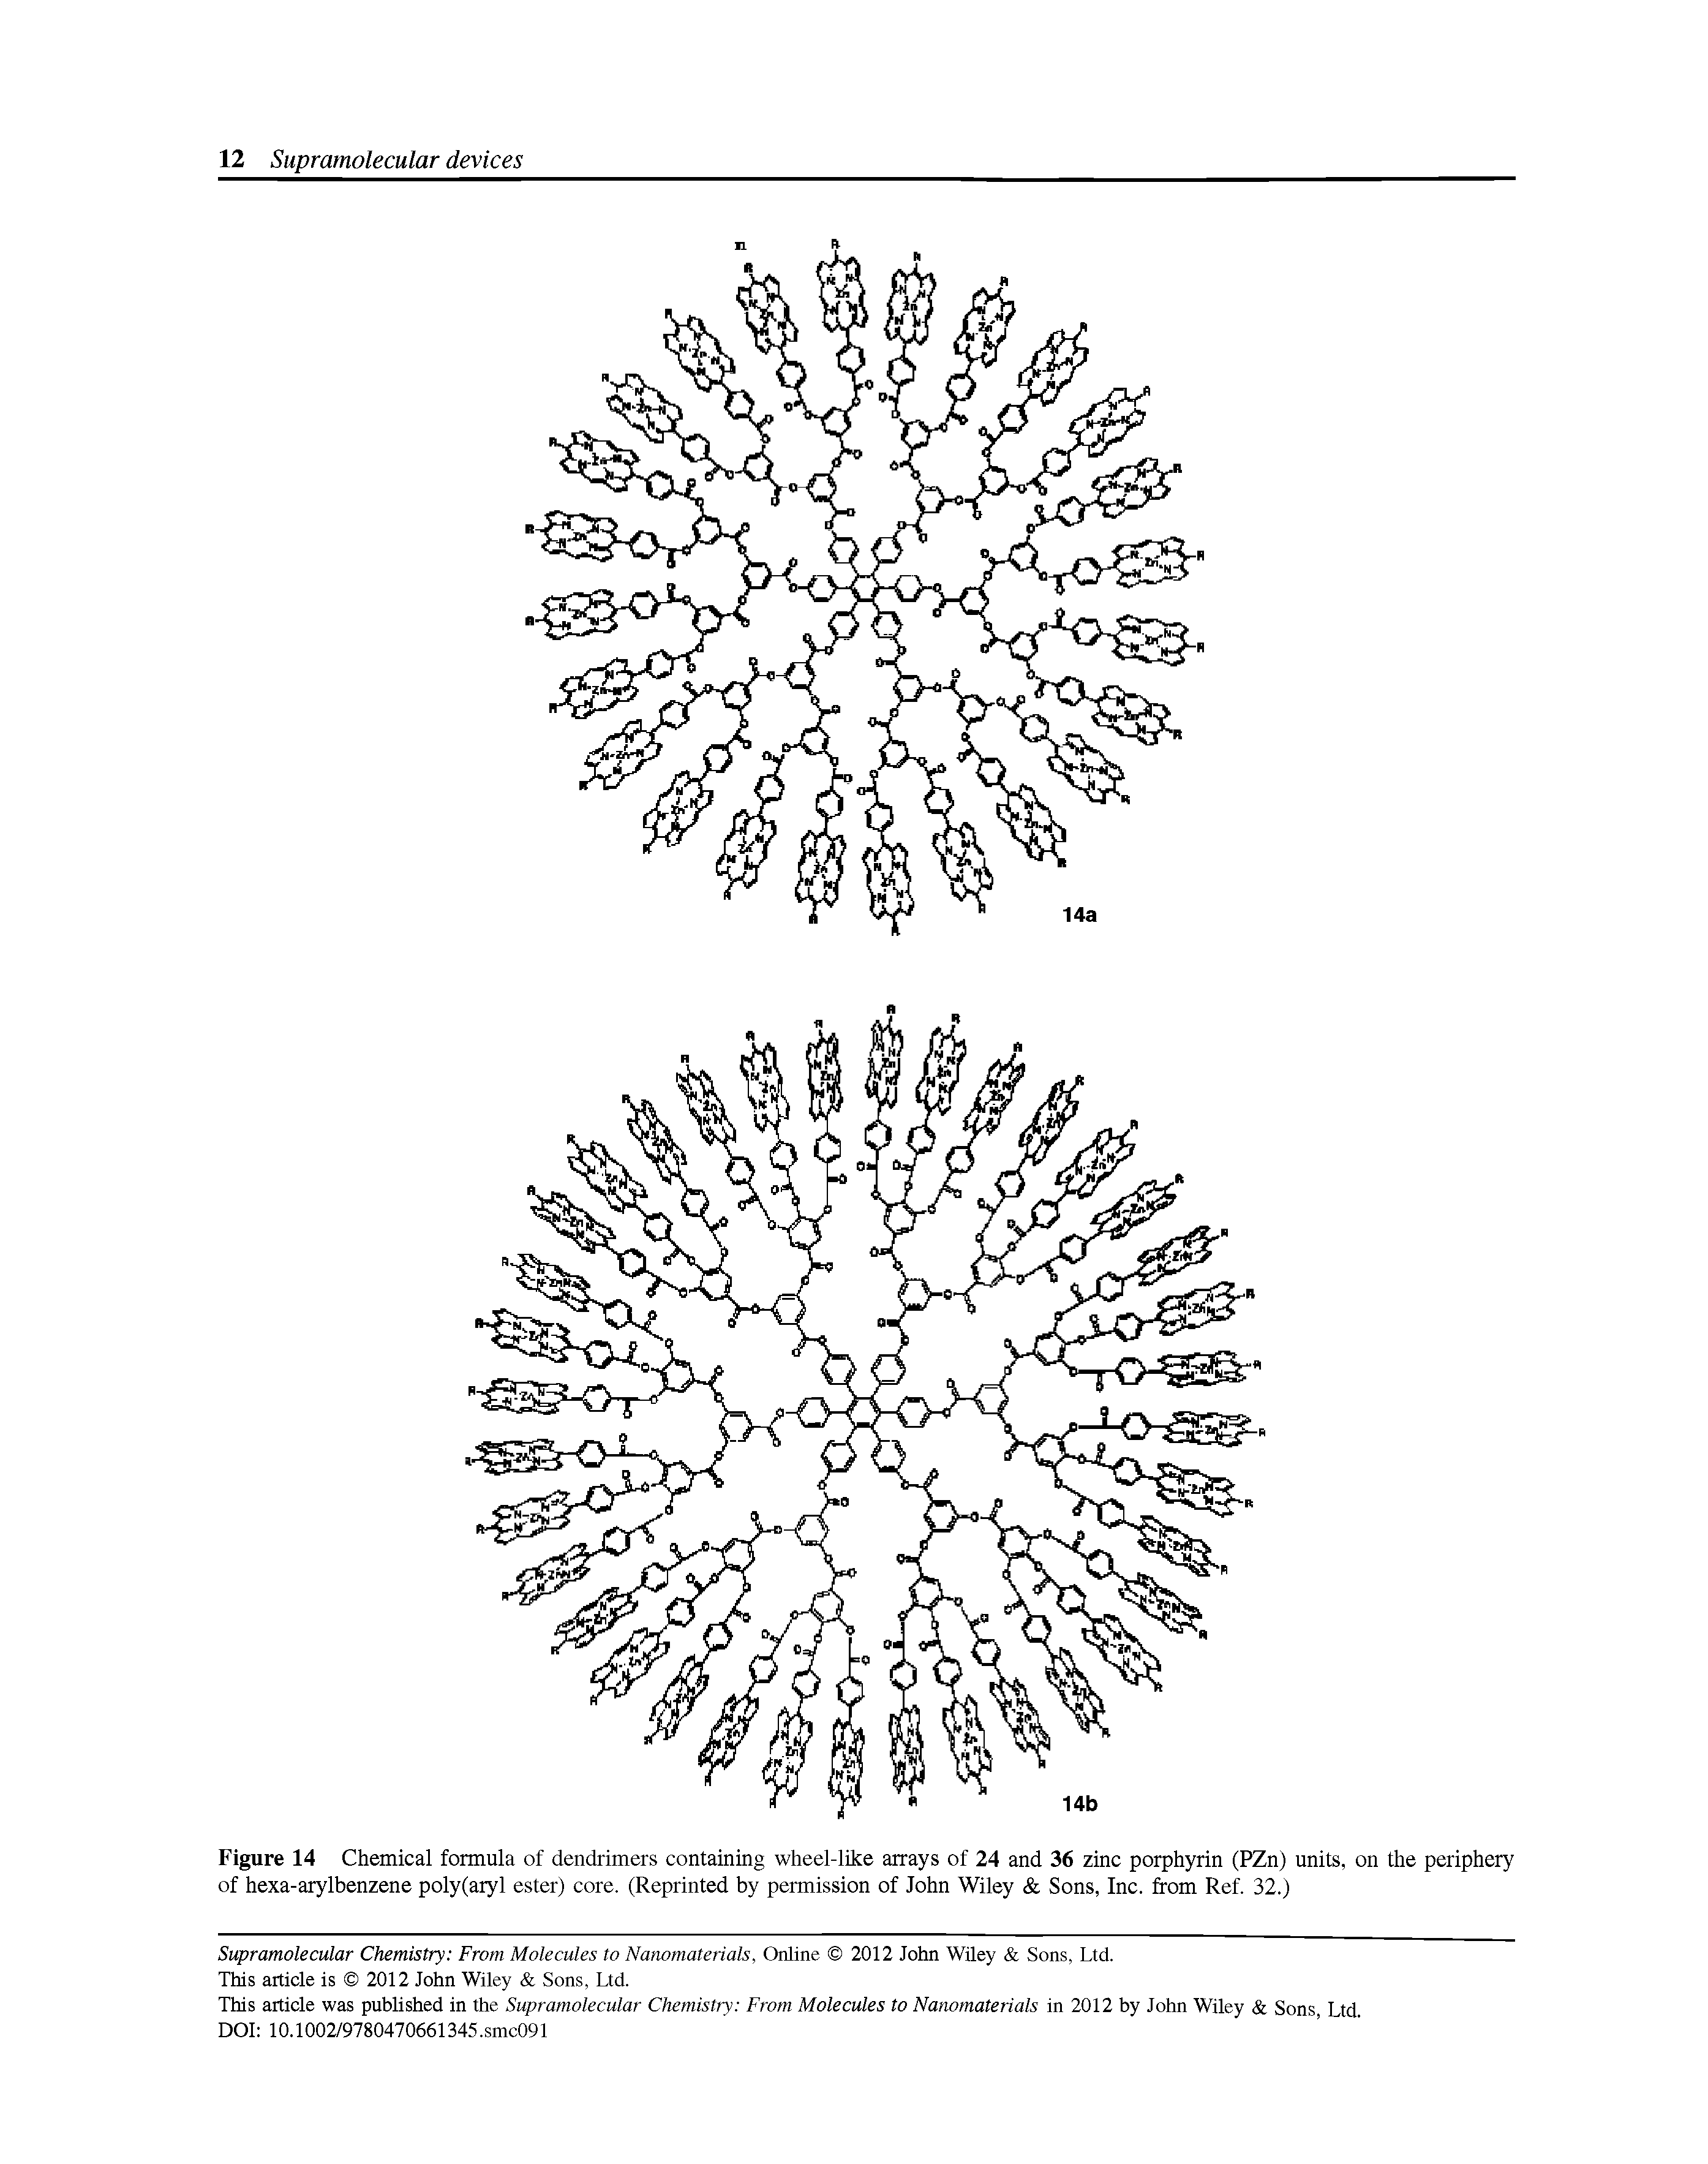 Figure 14 Chemical formula of dendrimers containing wheel-like arrays of 24 and 36 zinc porphyrin (PZn) units, on the periphery of hexa-arylbenzene poly(aryl ester) core. (Reprinted by permission of John Wiley Sons, Inc. from Ref. 32.)...